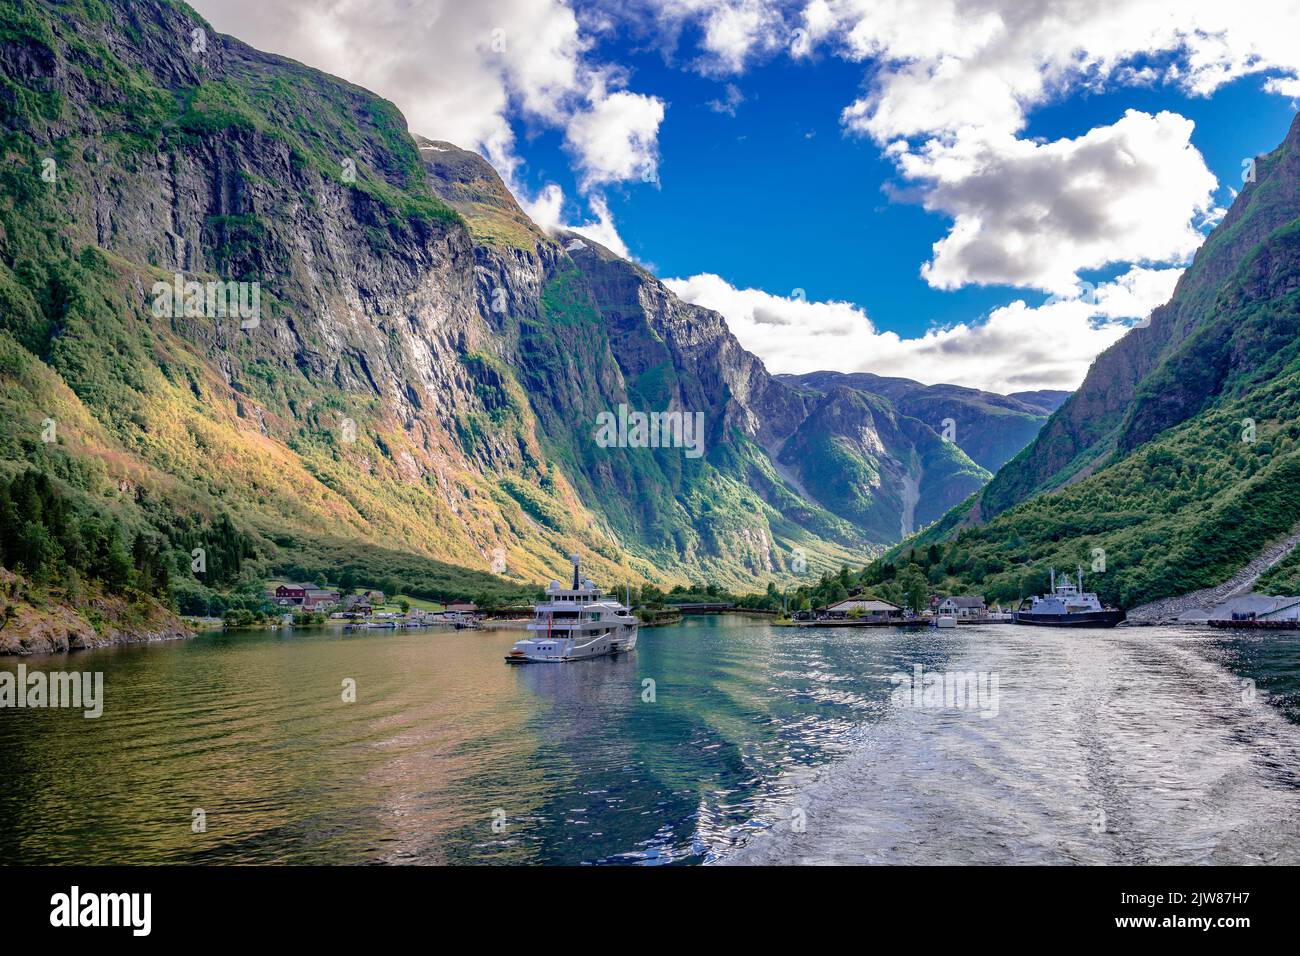 The beauty of the Aurlandsfjord in Vestland County, branch off of the main Sognefjorden, Norway's longest fjord.Flam is in the background. Stock Photo